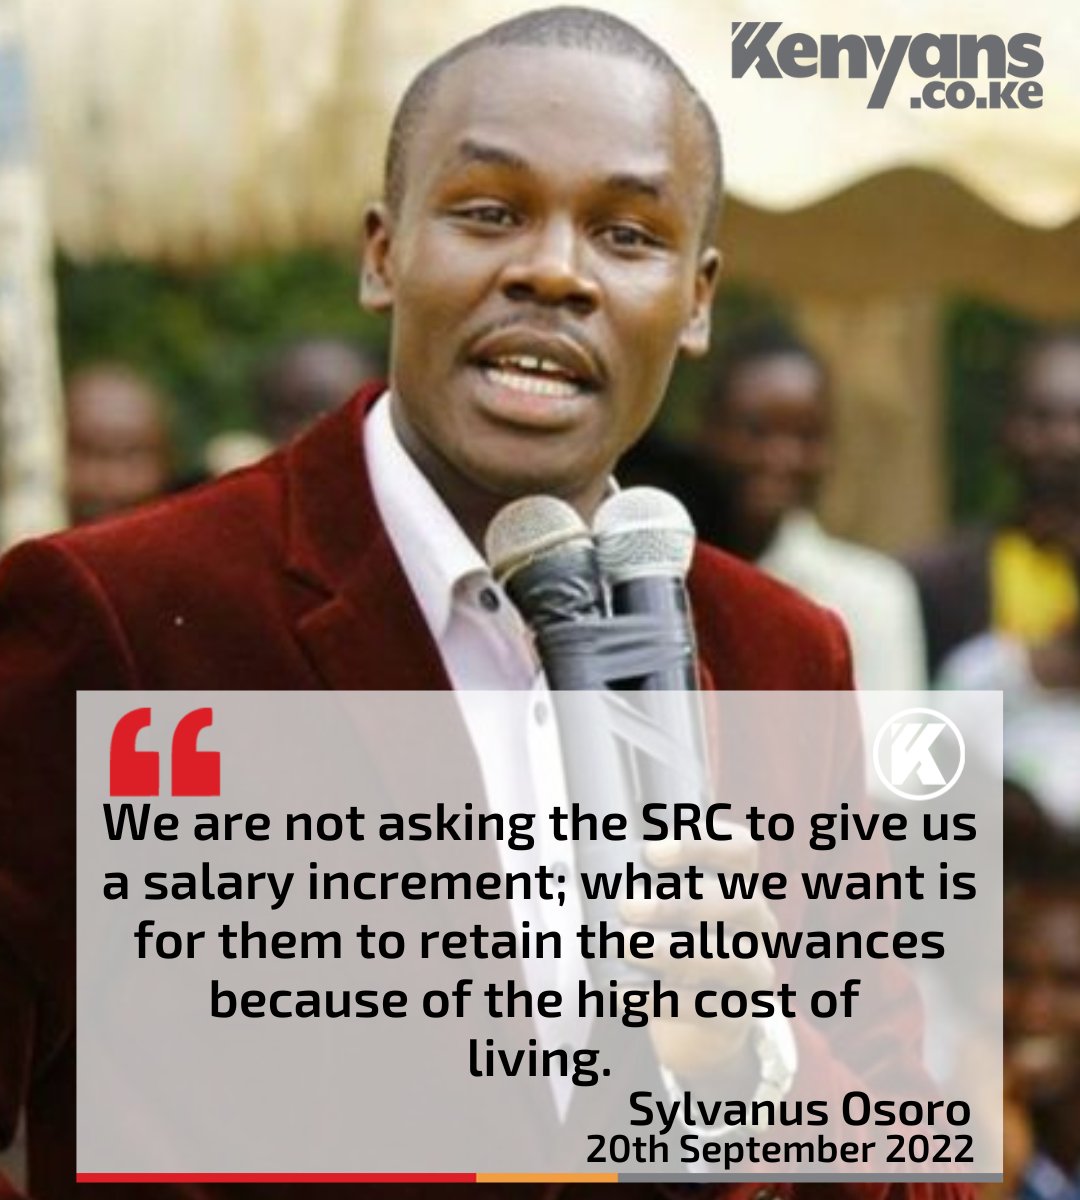 Retain our allowances, the cost of living is high - Sylvanus Osoro